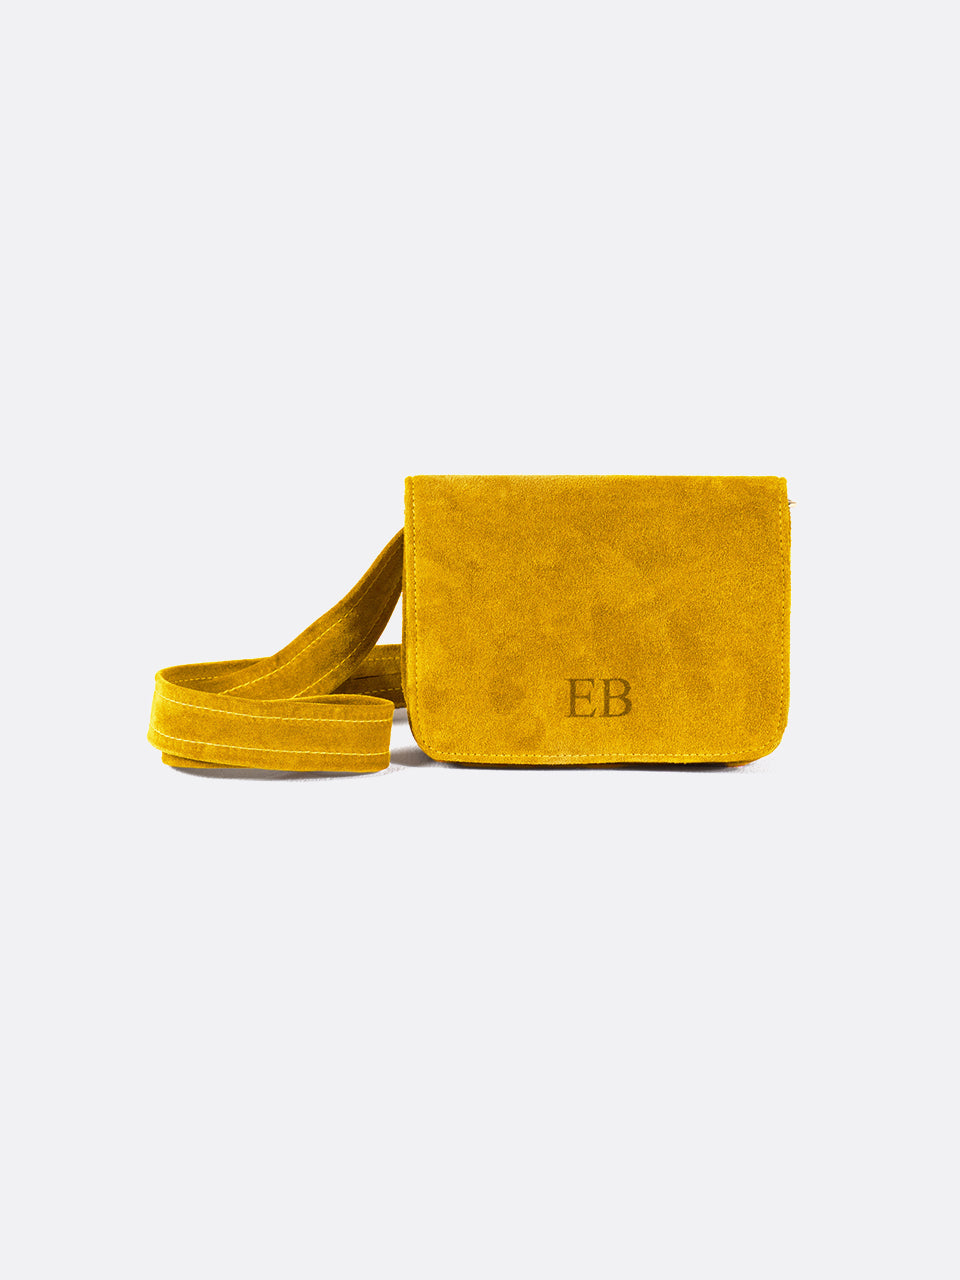 Italian Suede Leather Pouch for women - Yellow - 12